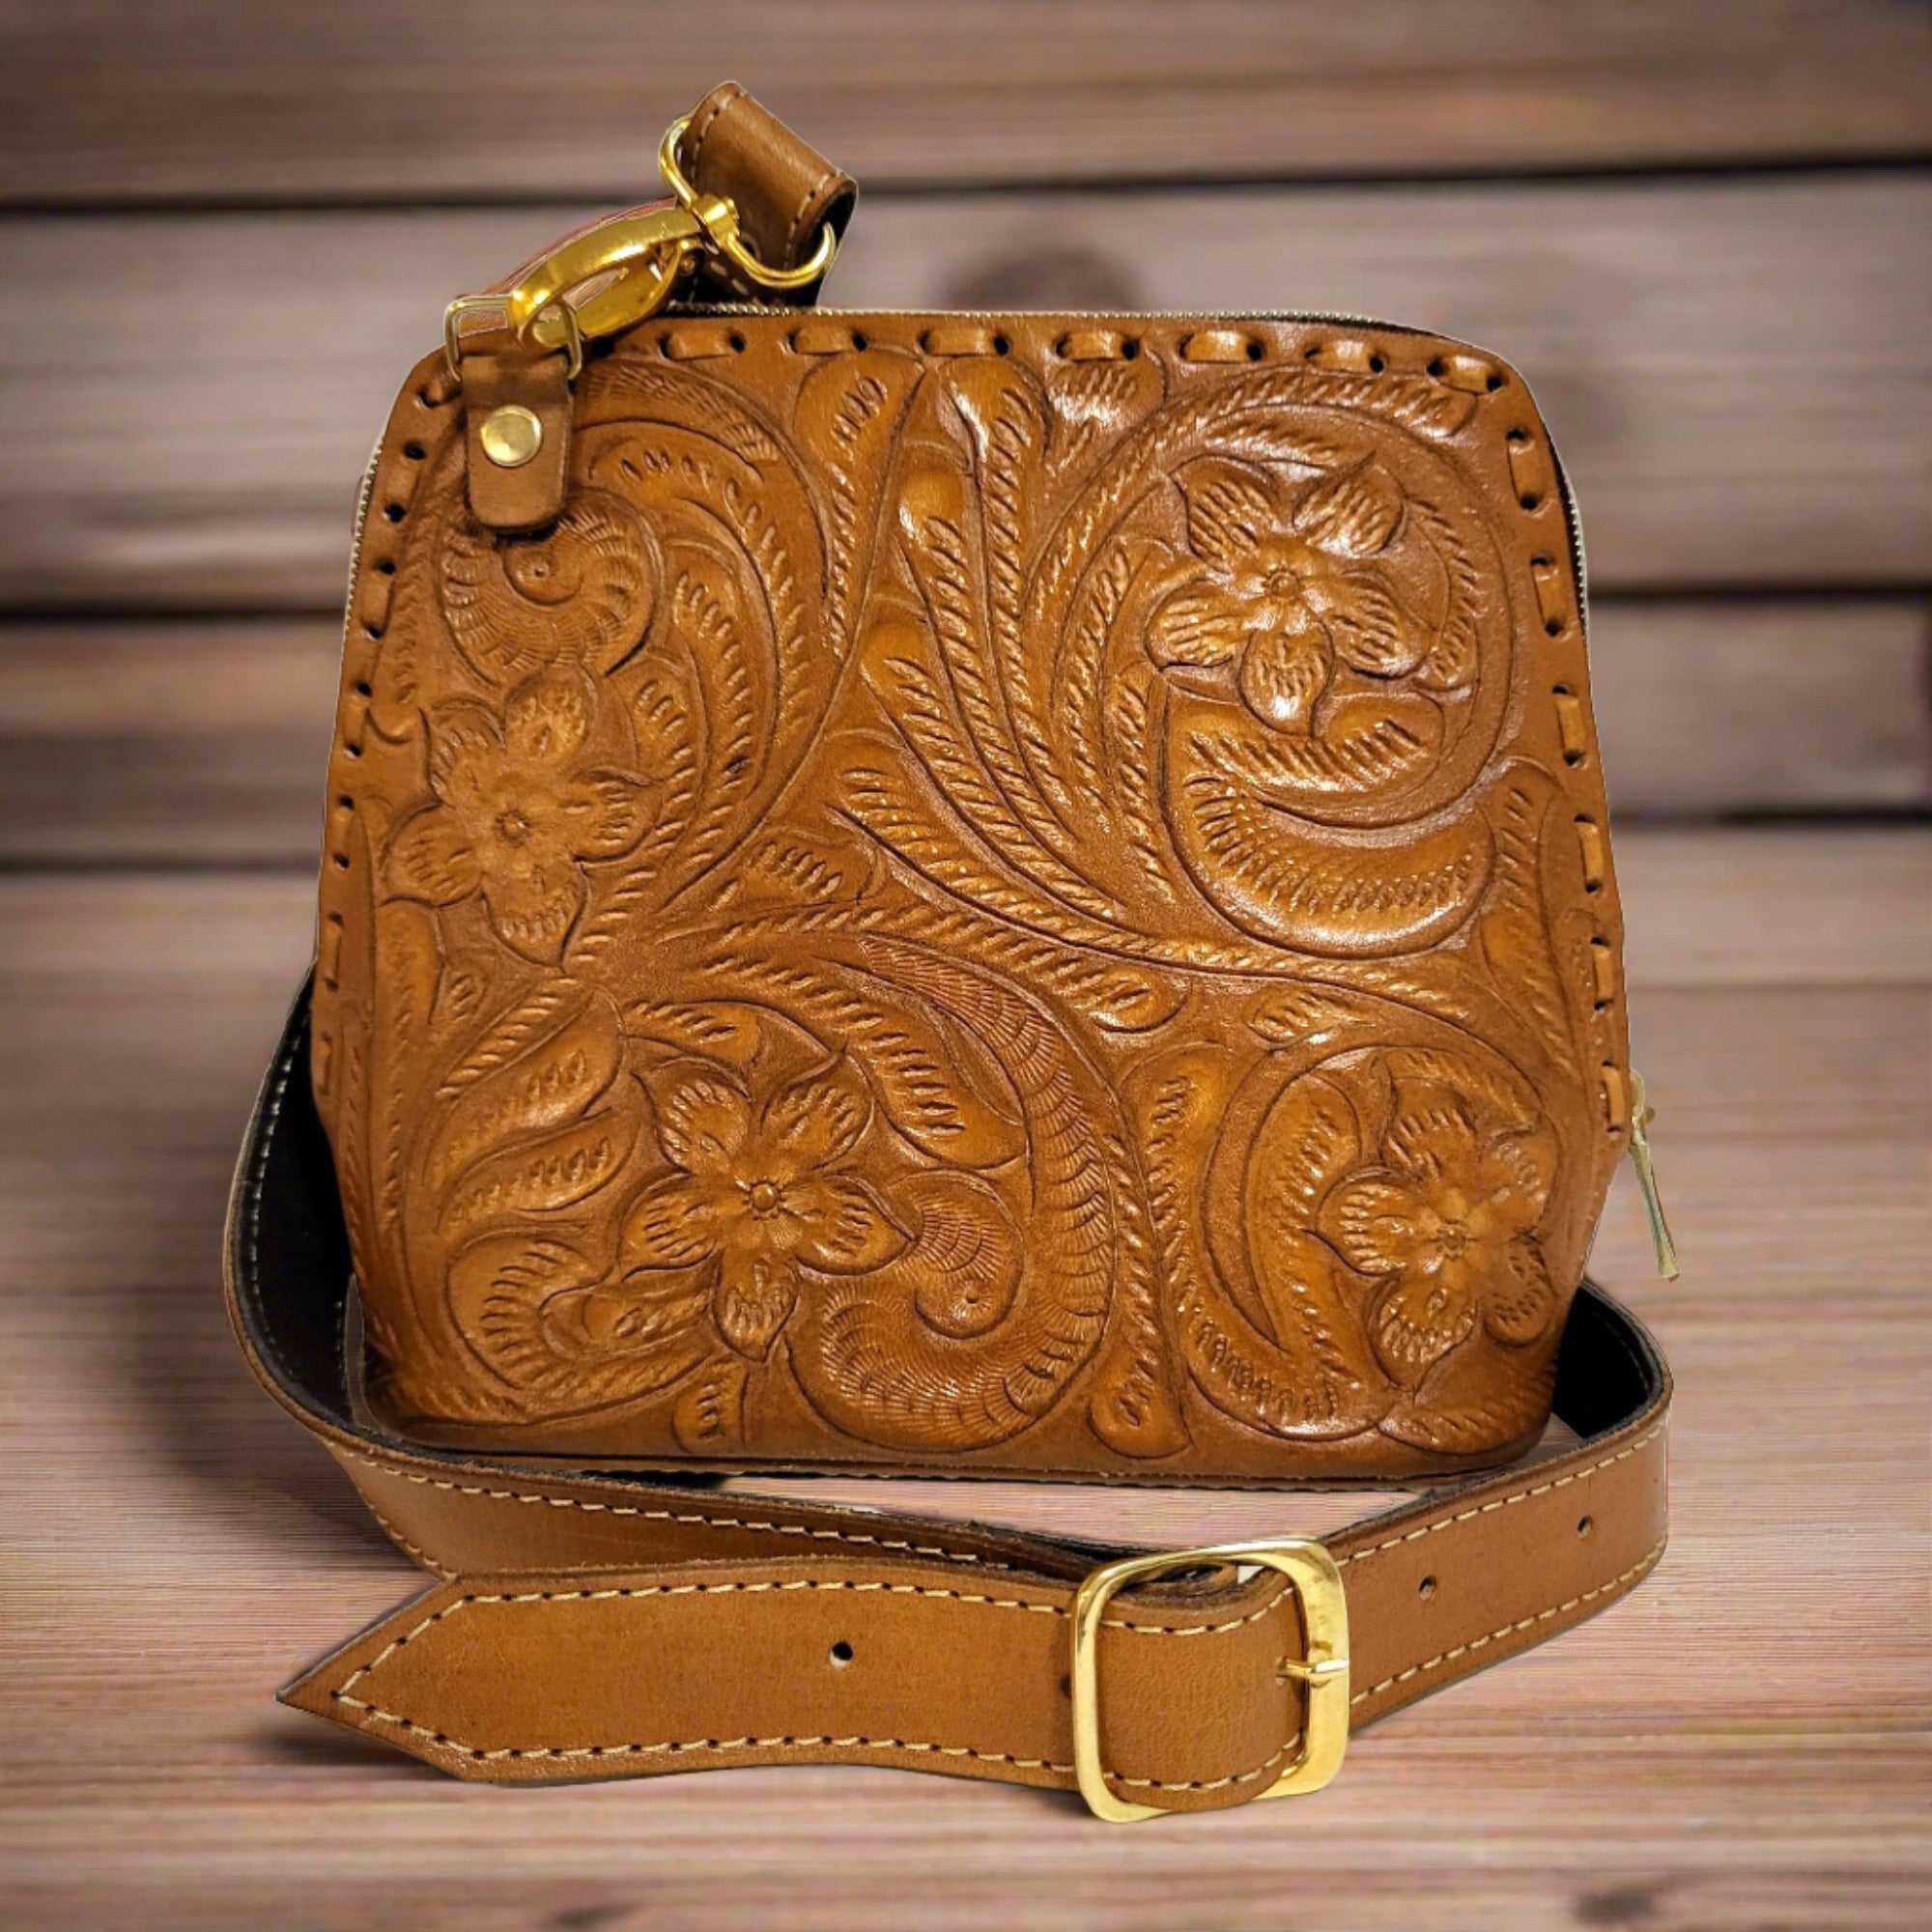  HAND TOOLED LEATHER BAG FOR WOMEN. SMALL LEATHER BAG